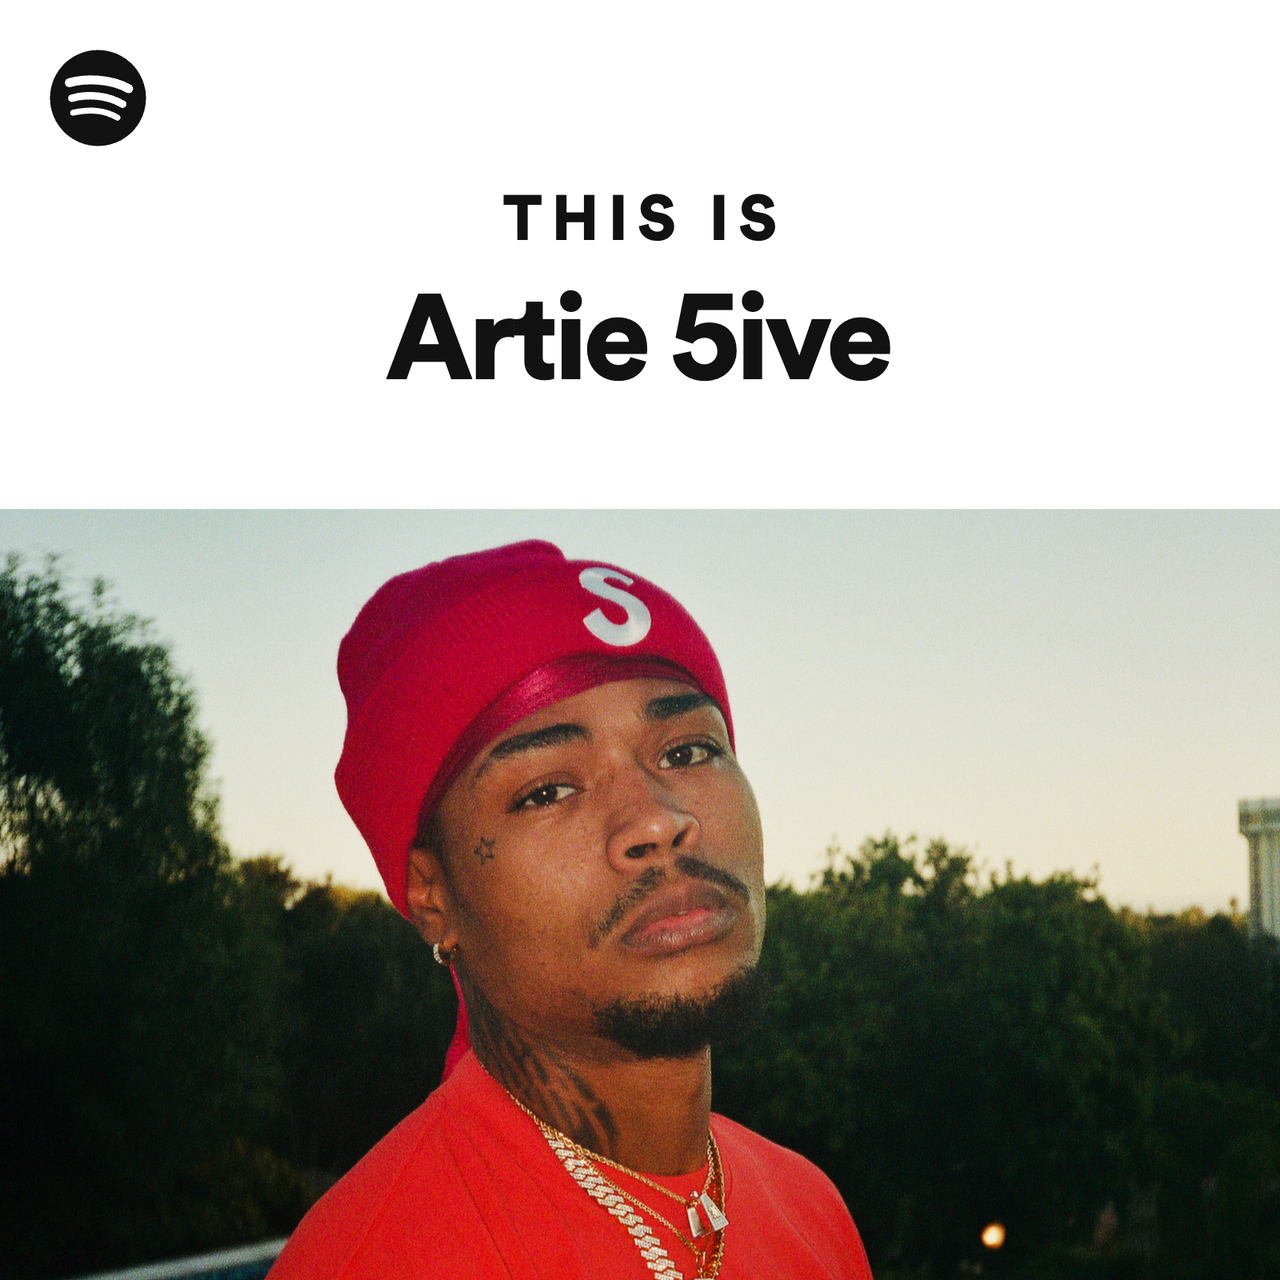 Who produced “TOP G” by Artie 5ive?